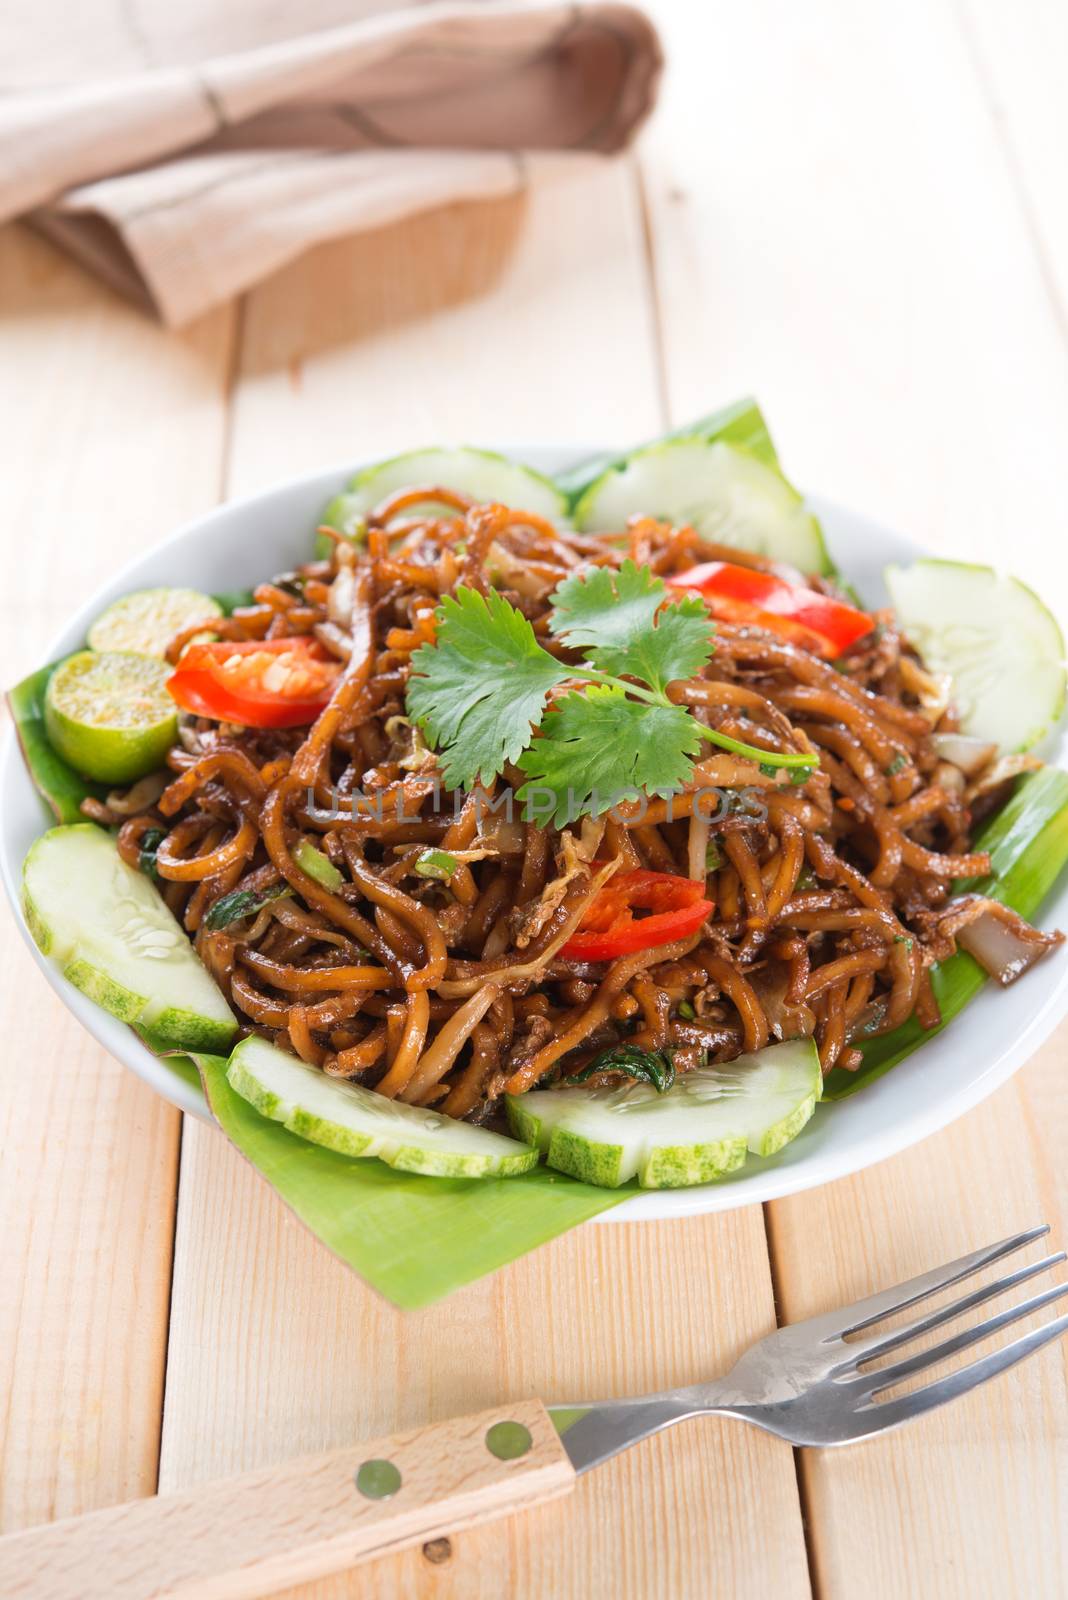 Asian spicy fried noodles by szefei